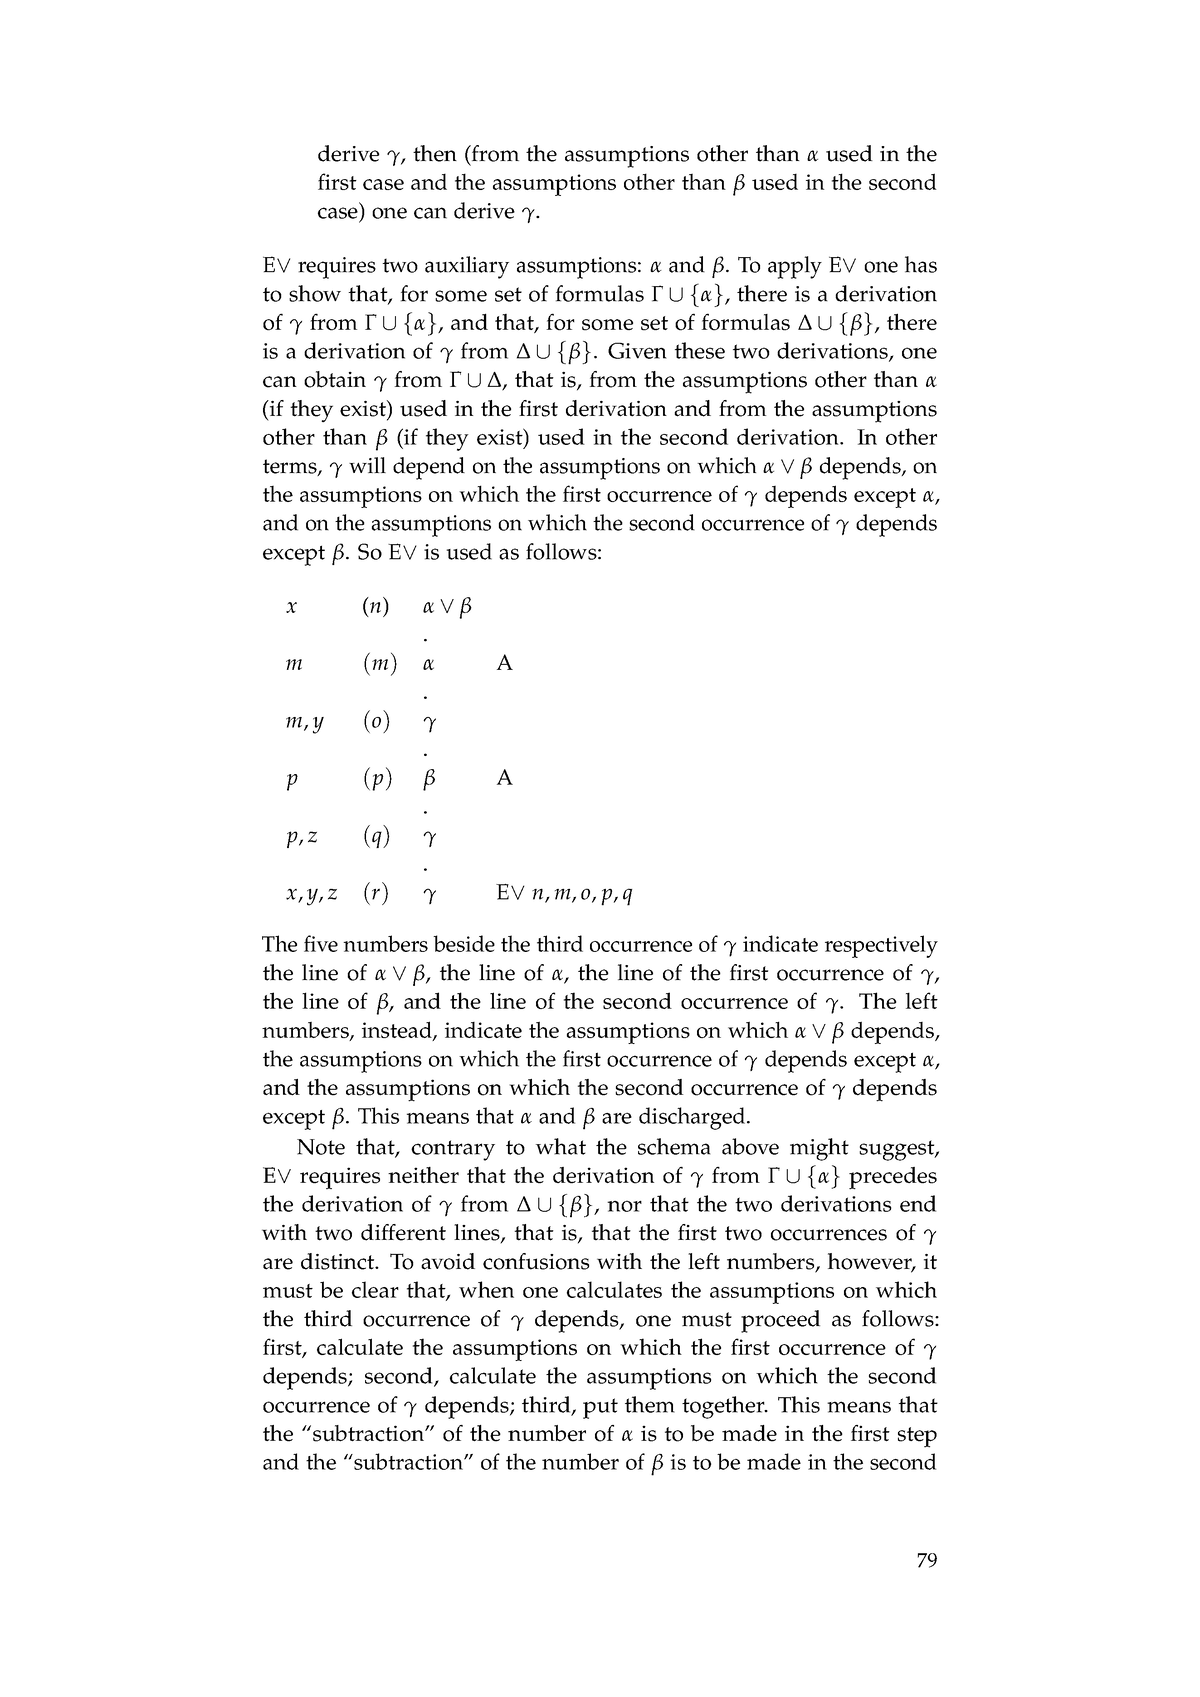 English-logic-3 (25) - N/A - derive γ, then (from the assumptions other ...